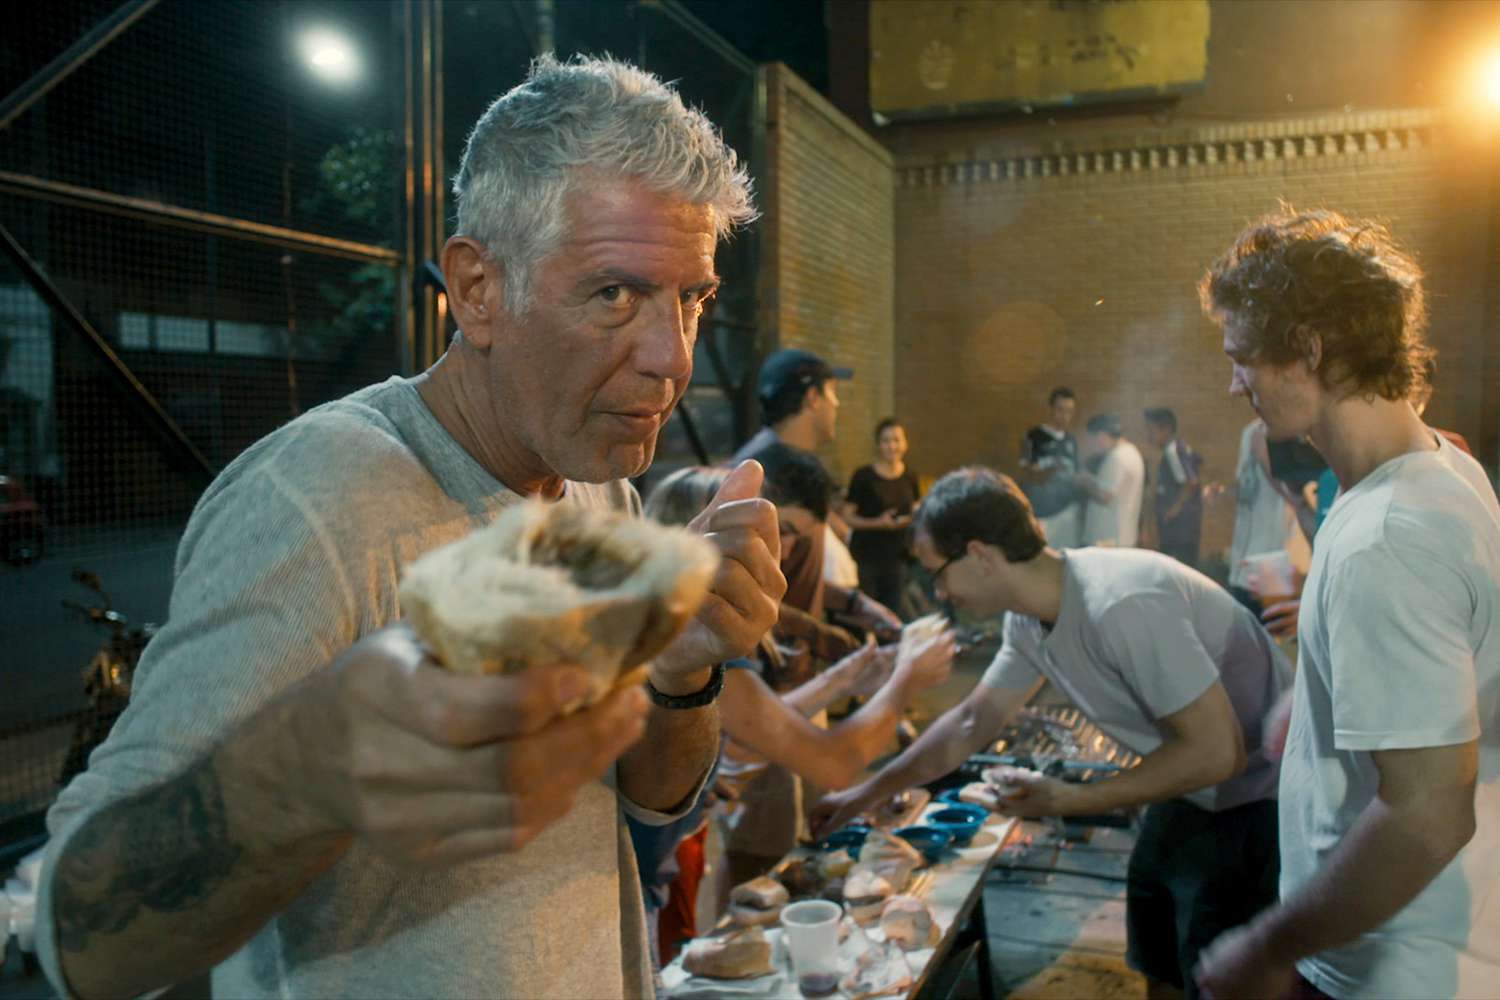 Anthony Bourdain stars in Morgan Neville's documentary, ROADRUNNER, a Focus Features release.